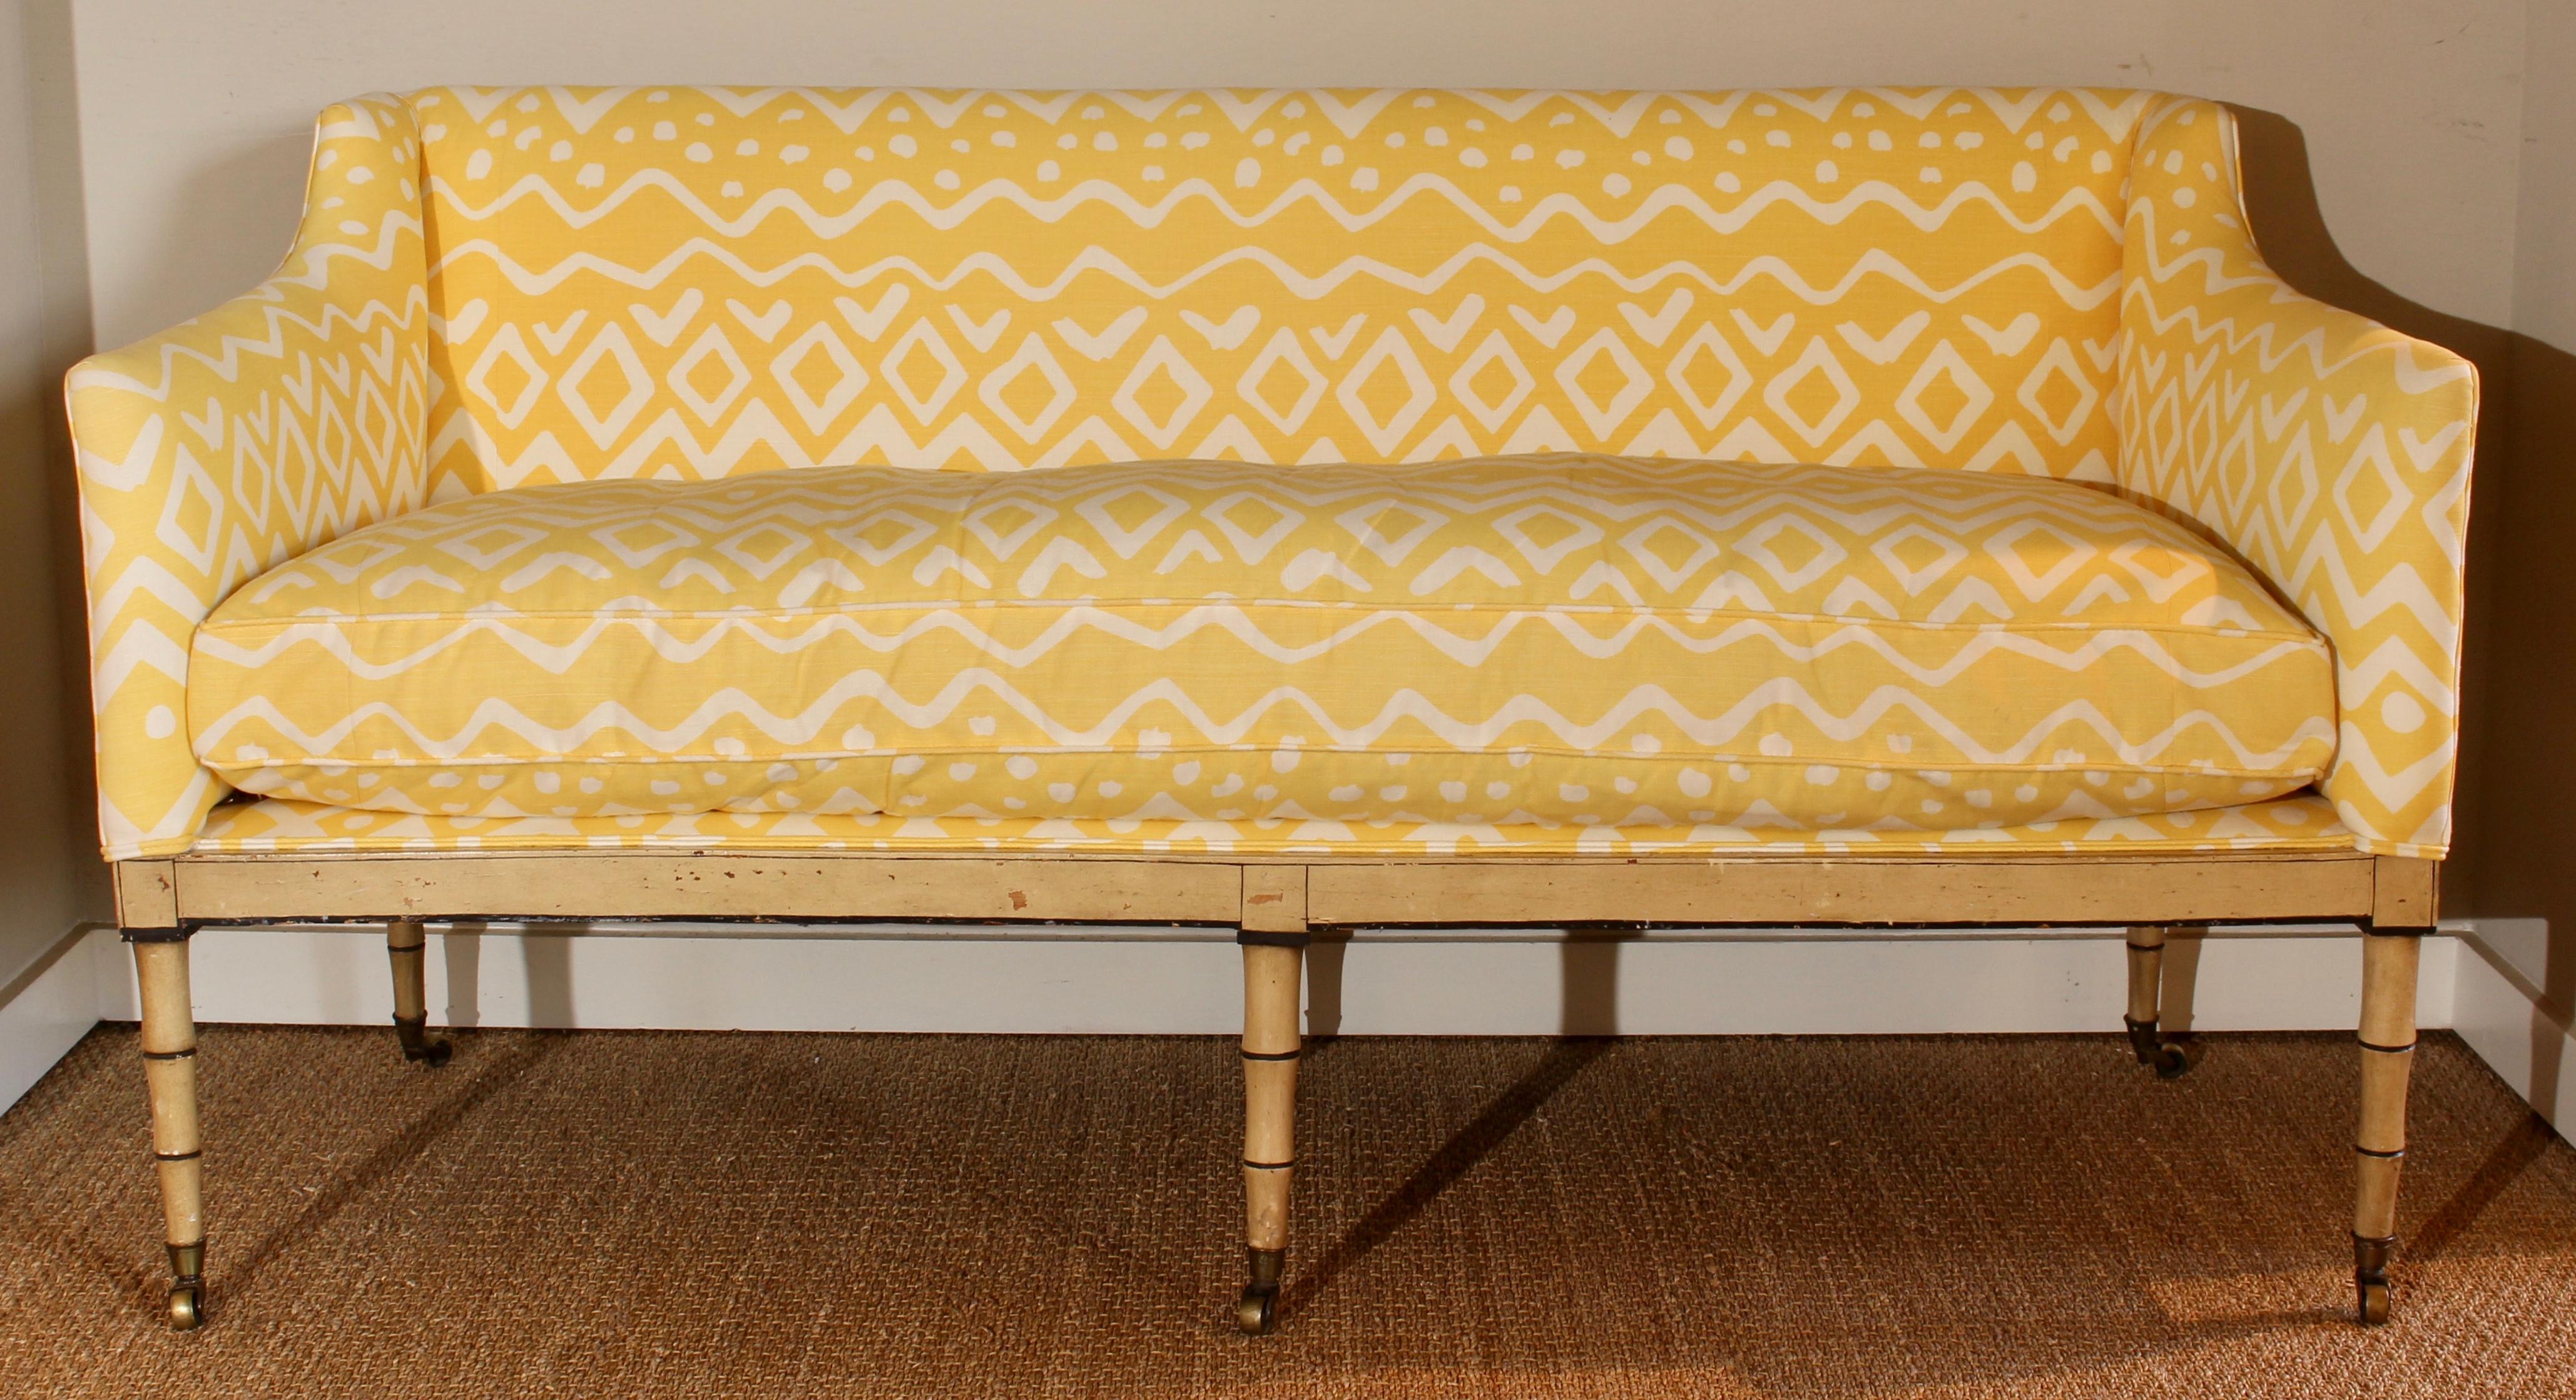 An early 19th century, English upholstered sofa with one long down filled cushion recently covered in a yellow linen fabric and resting on faux bamboo tapering legs terminating in brass cup casters.